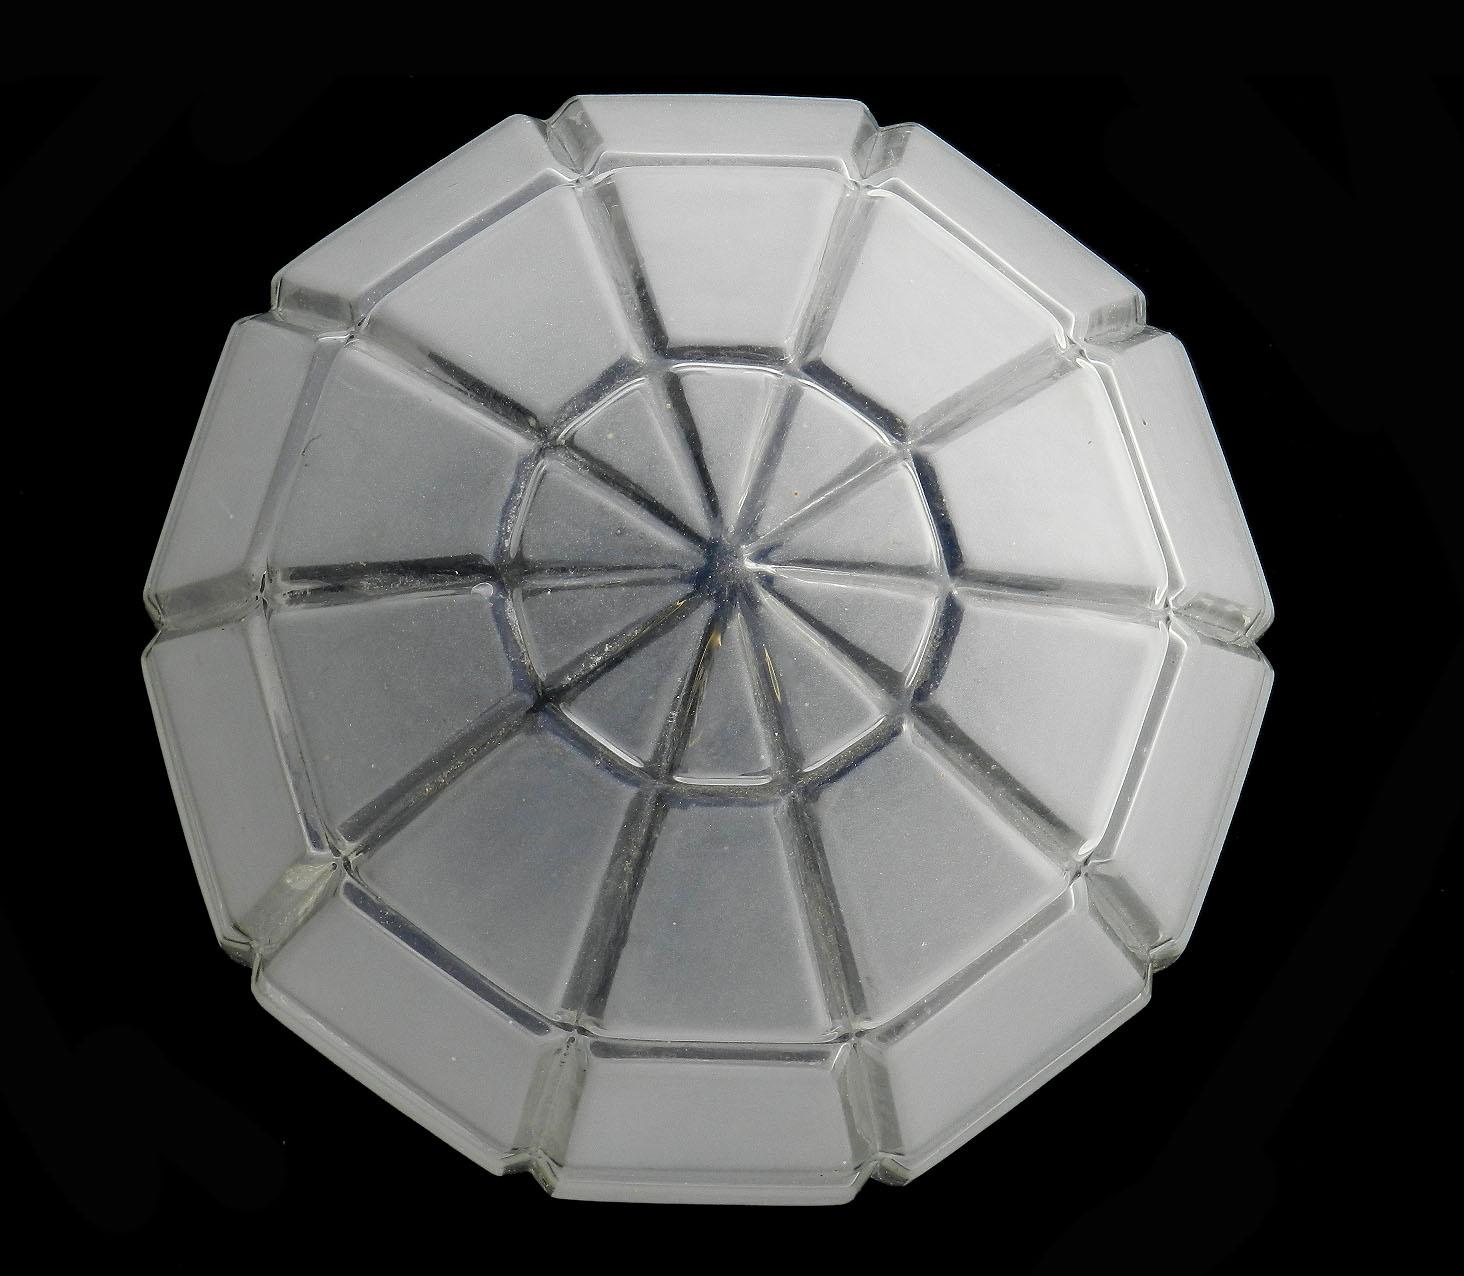 Art Deco flush mount large ceiling light frosted glass globe circa 1930
All original 
Frosted glass
In good original condition with no losses to glass with minor marks of use commensurate with age
This can be re-wired to USA or UK and European